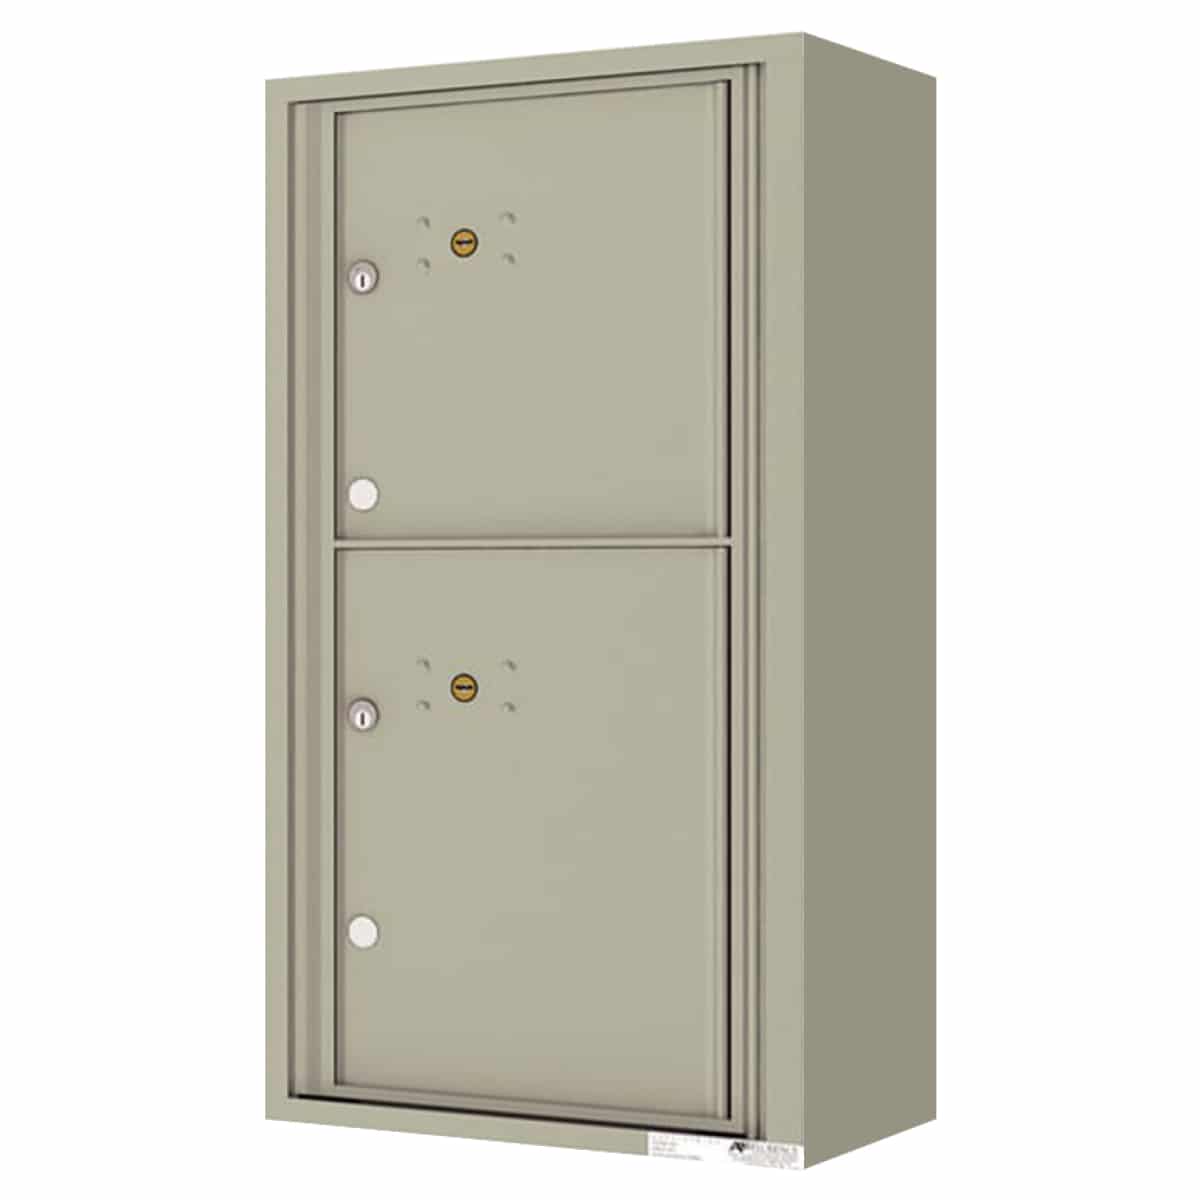 Surface Mount 4C Horizontal Mailbox – 2 Parcel Lockers – Front Loading – 4C09S-2P-SM Product Image